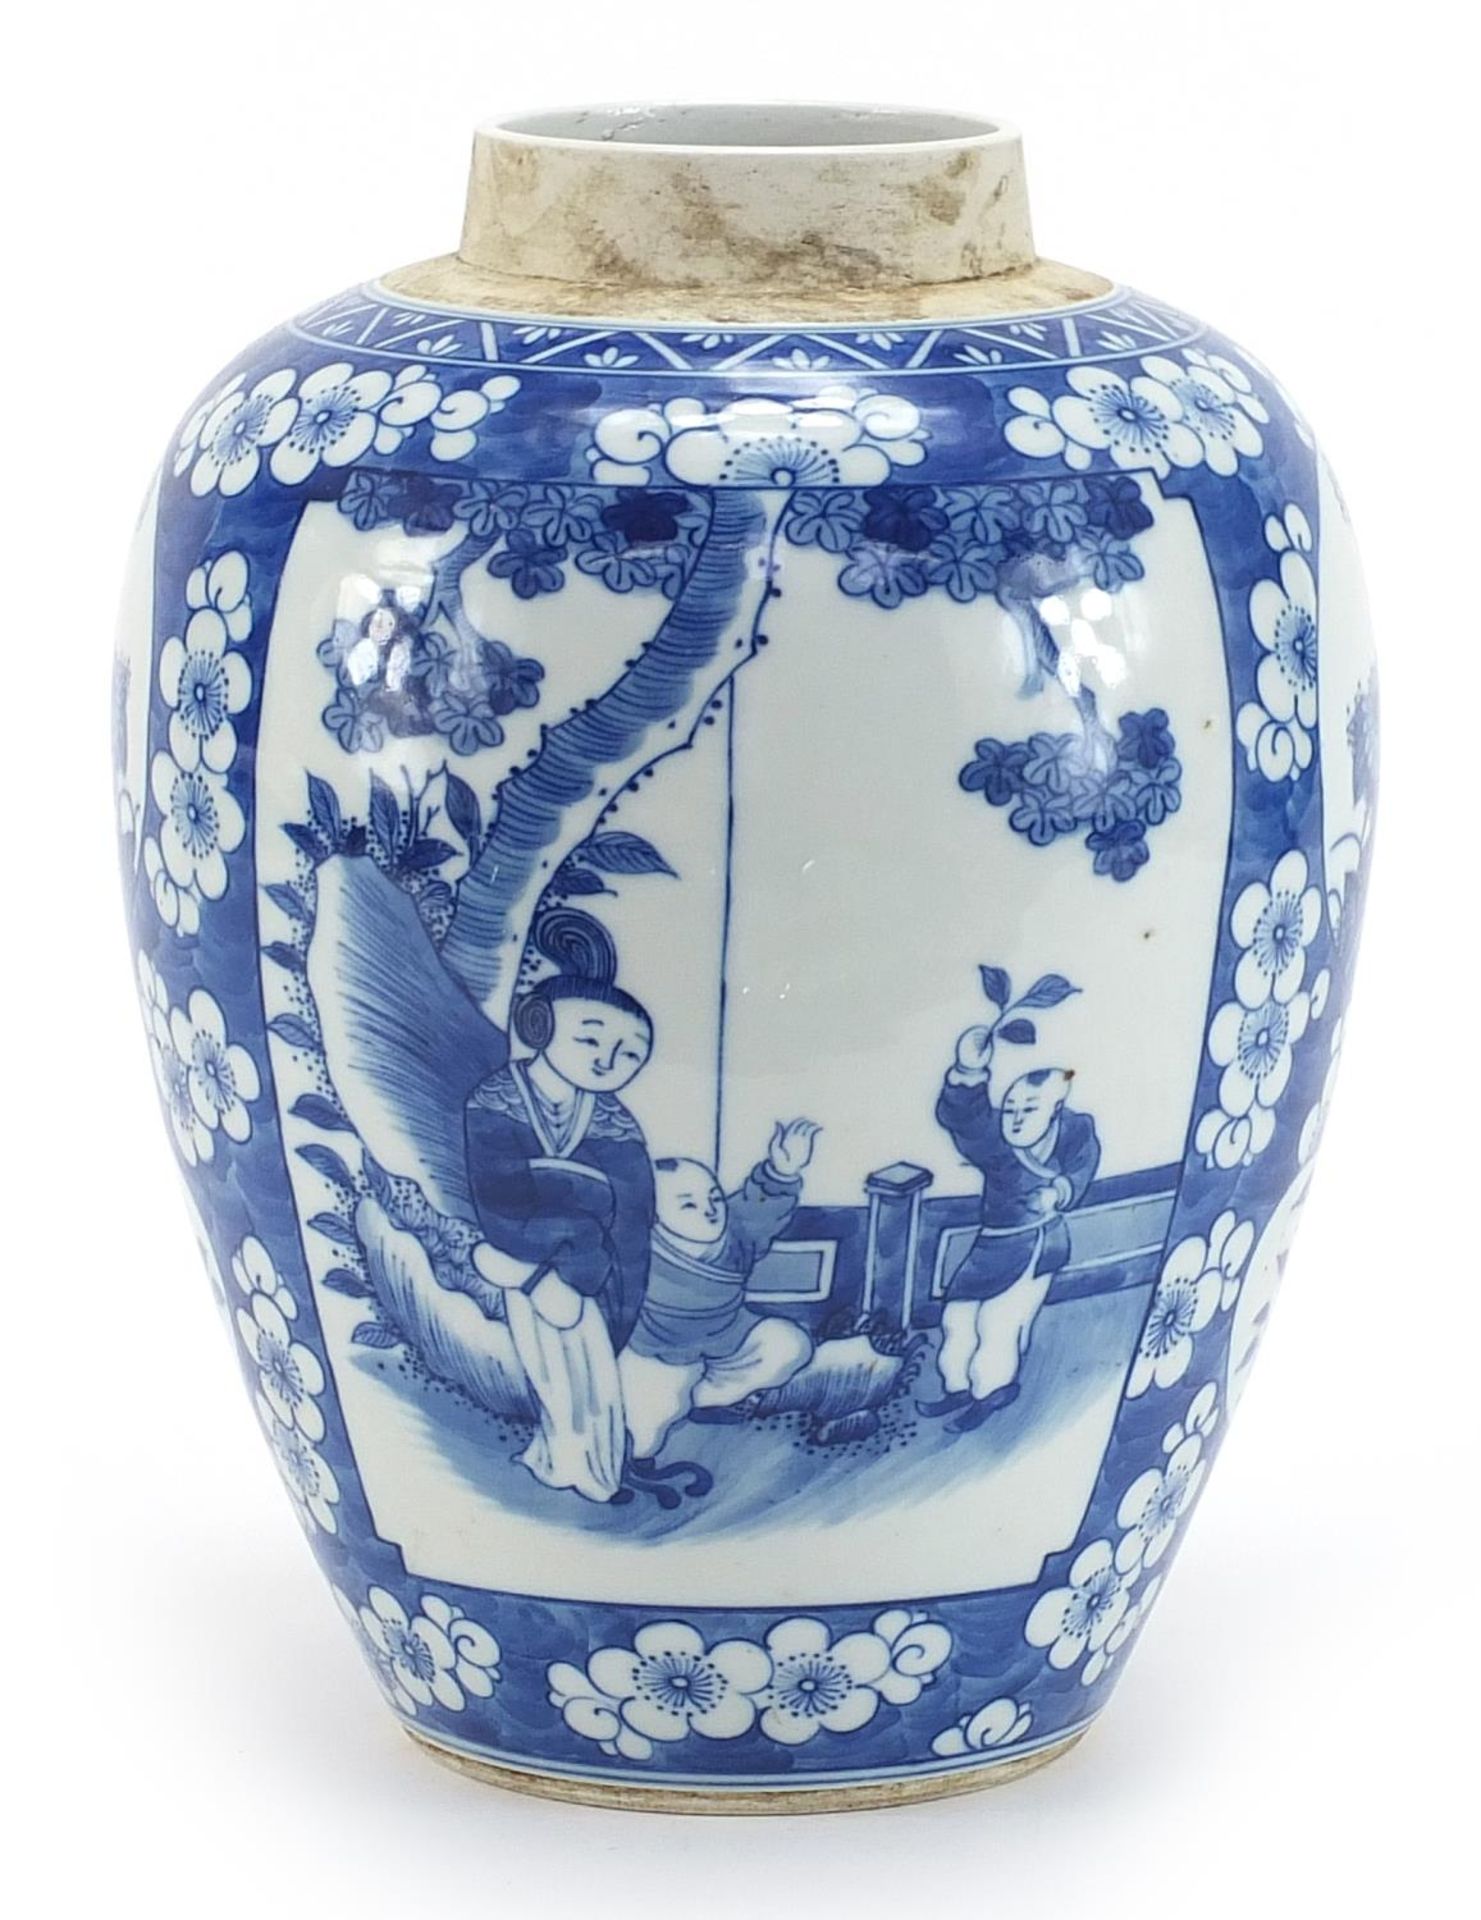 Large Chinese blue and white porcelain ginger jar hand painted with panels of figures and flowers